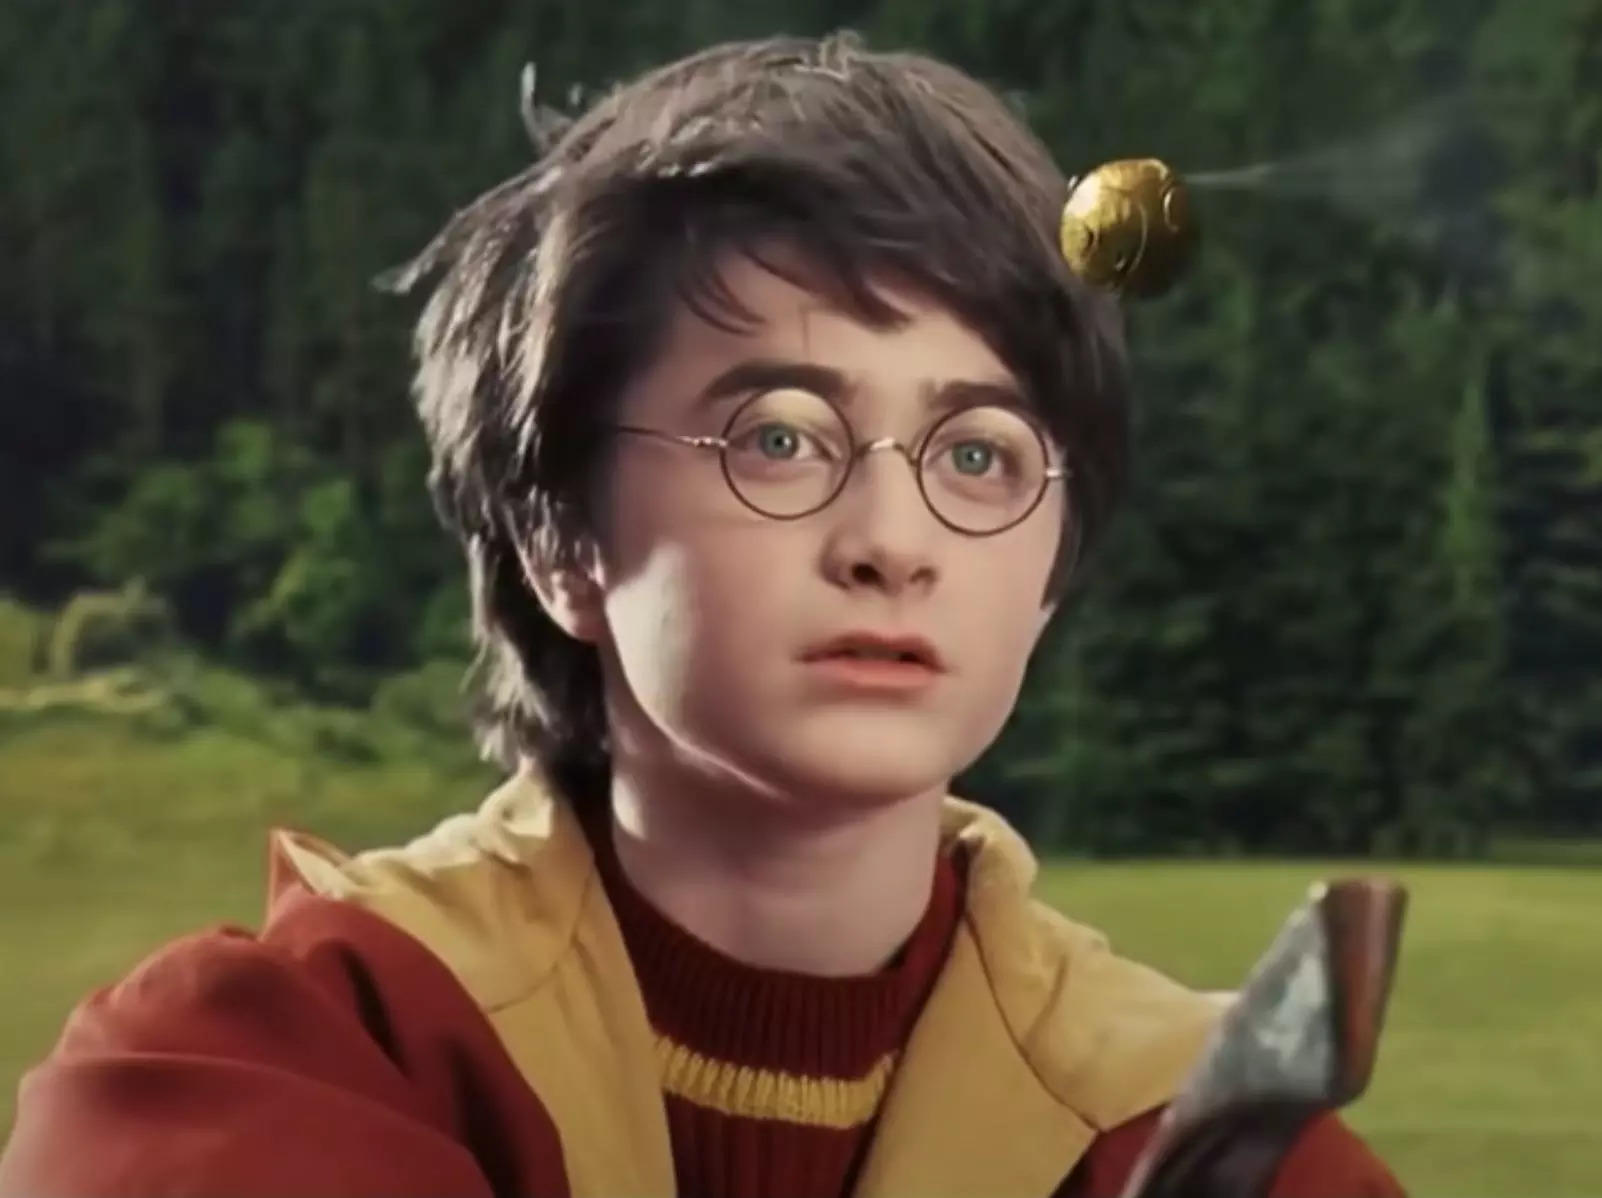 Daniel Radcliffe as Harry in "Harry Potter in the Chamber of Secrets."